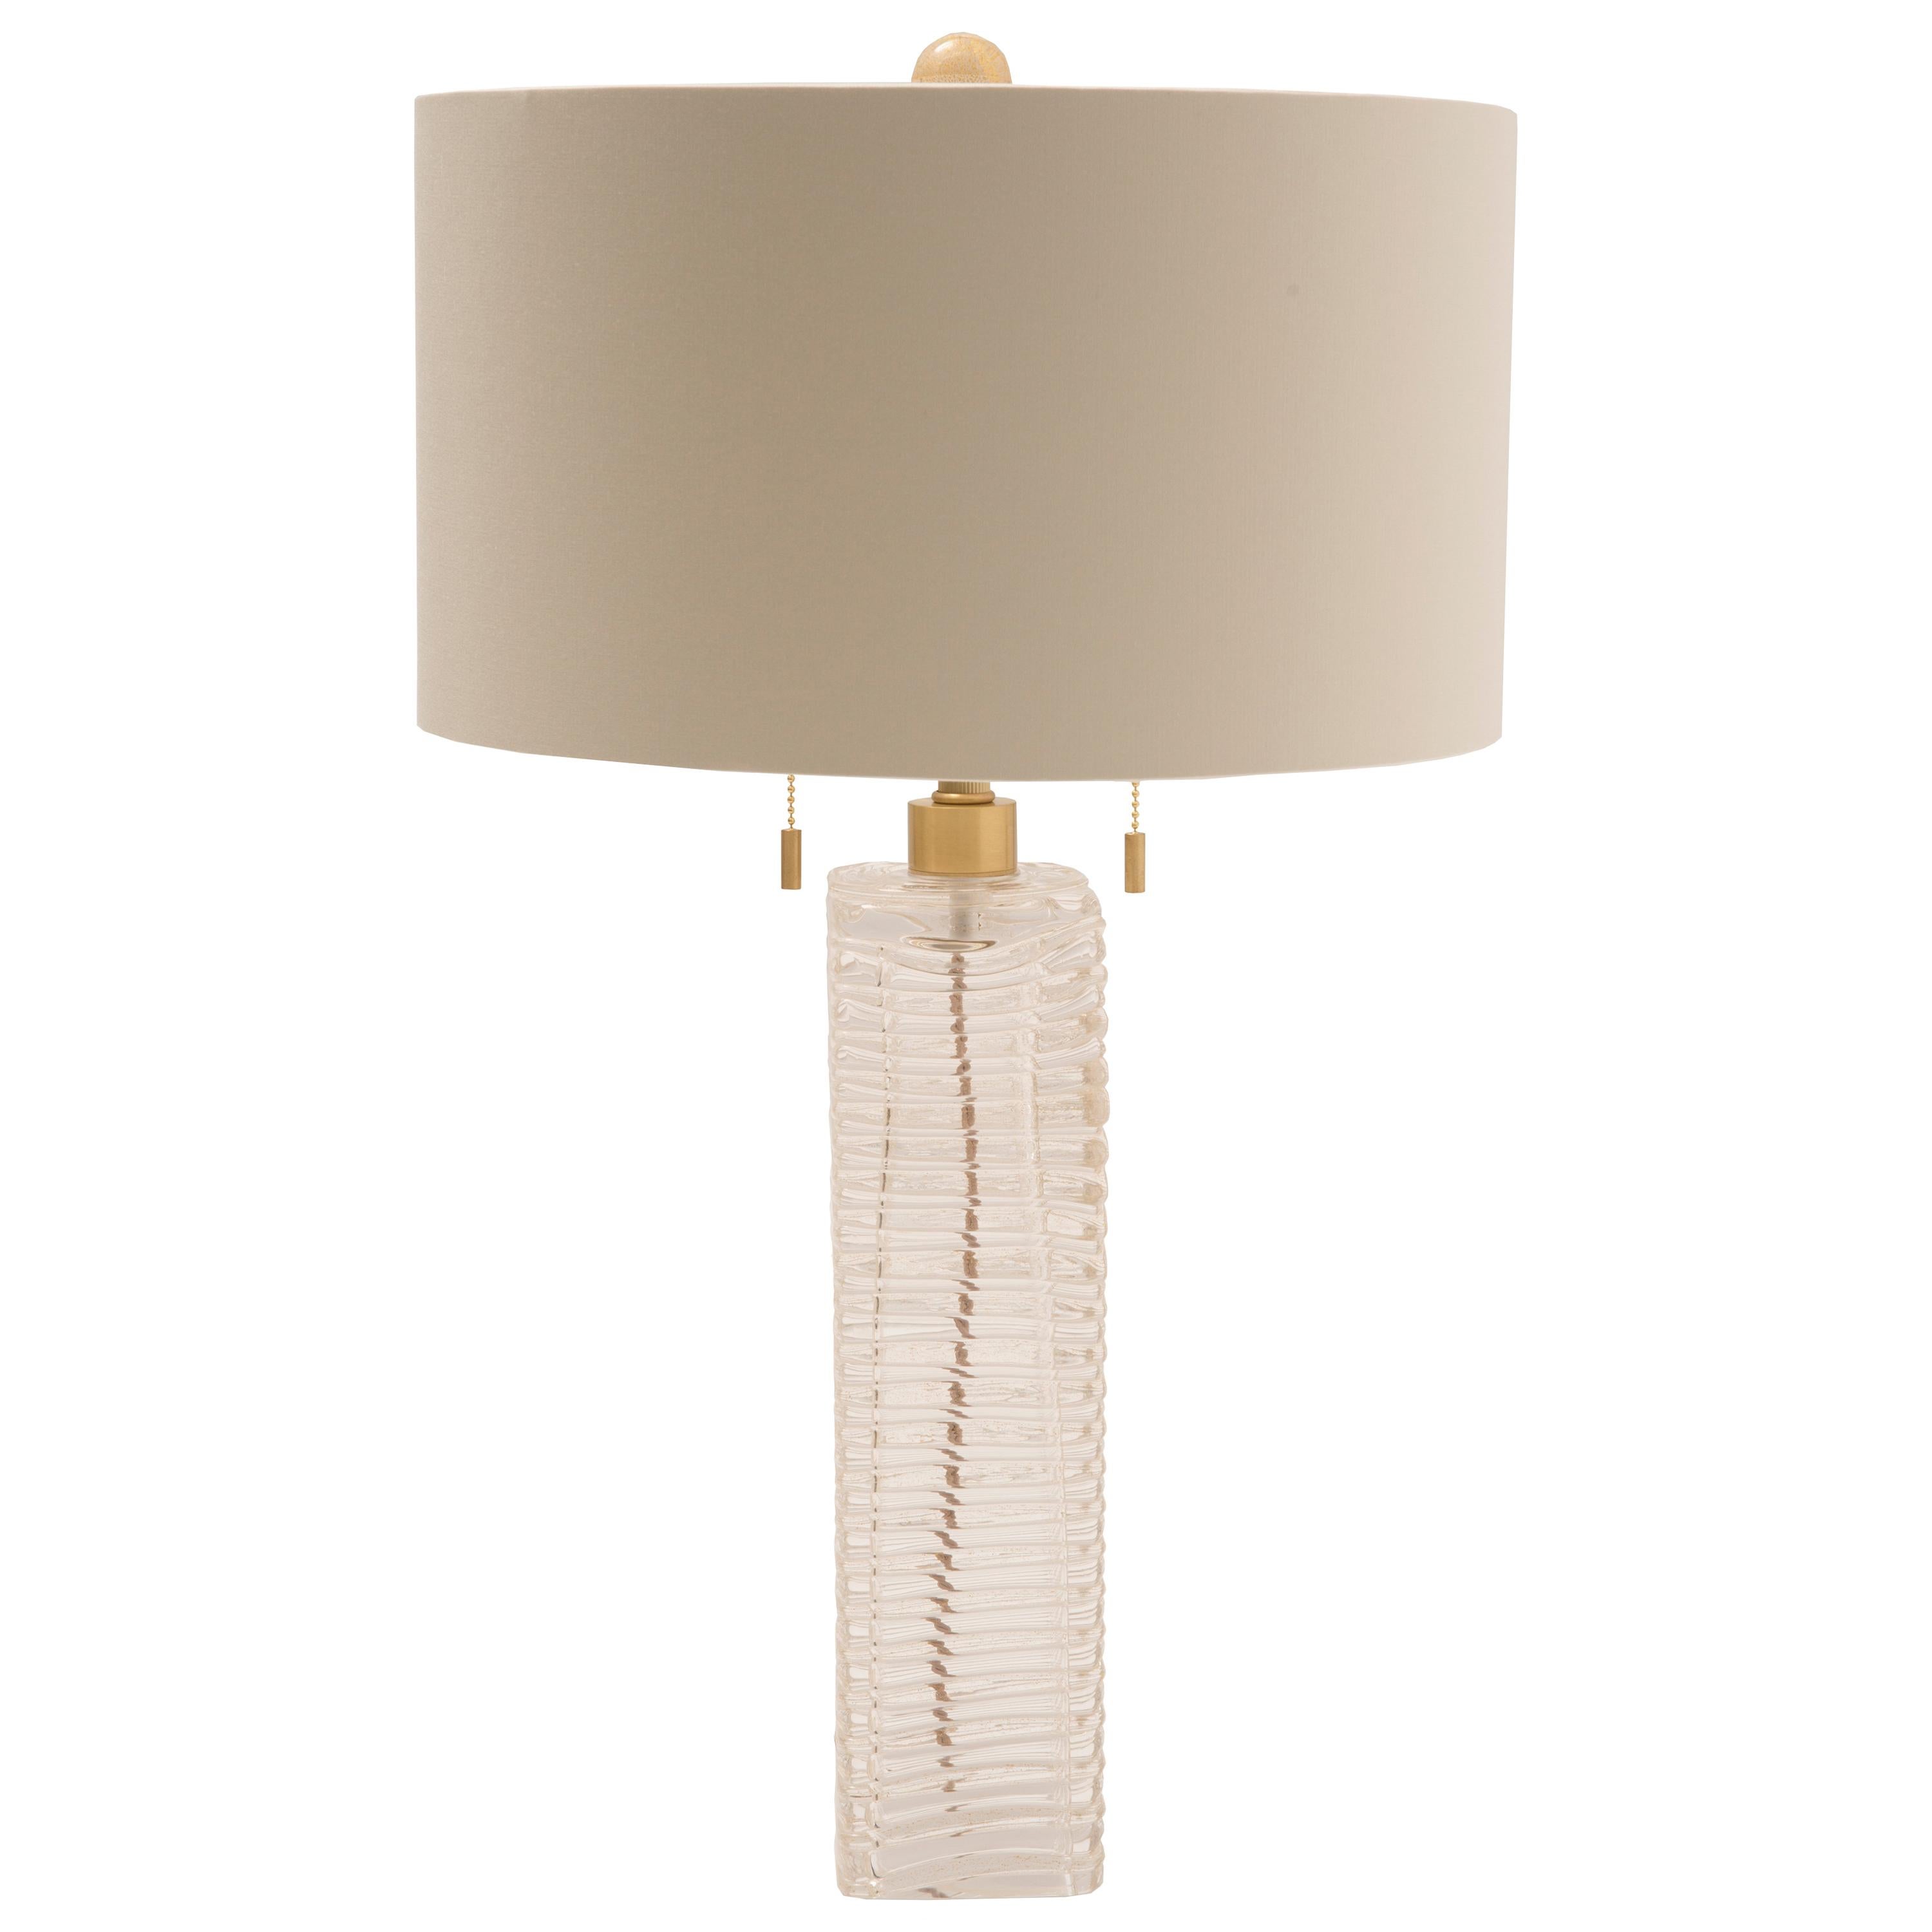 Donghia Alto Table Lamp & Shade, Murano Glass in Clear with Handblown Ripples For Sale